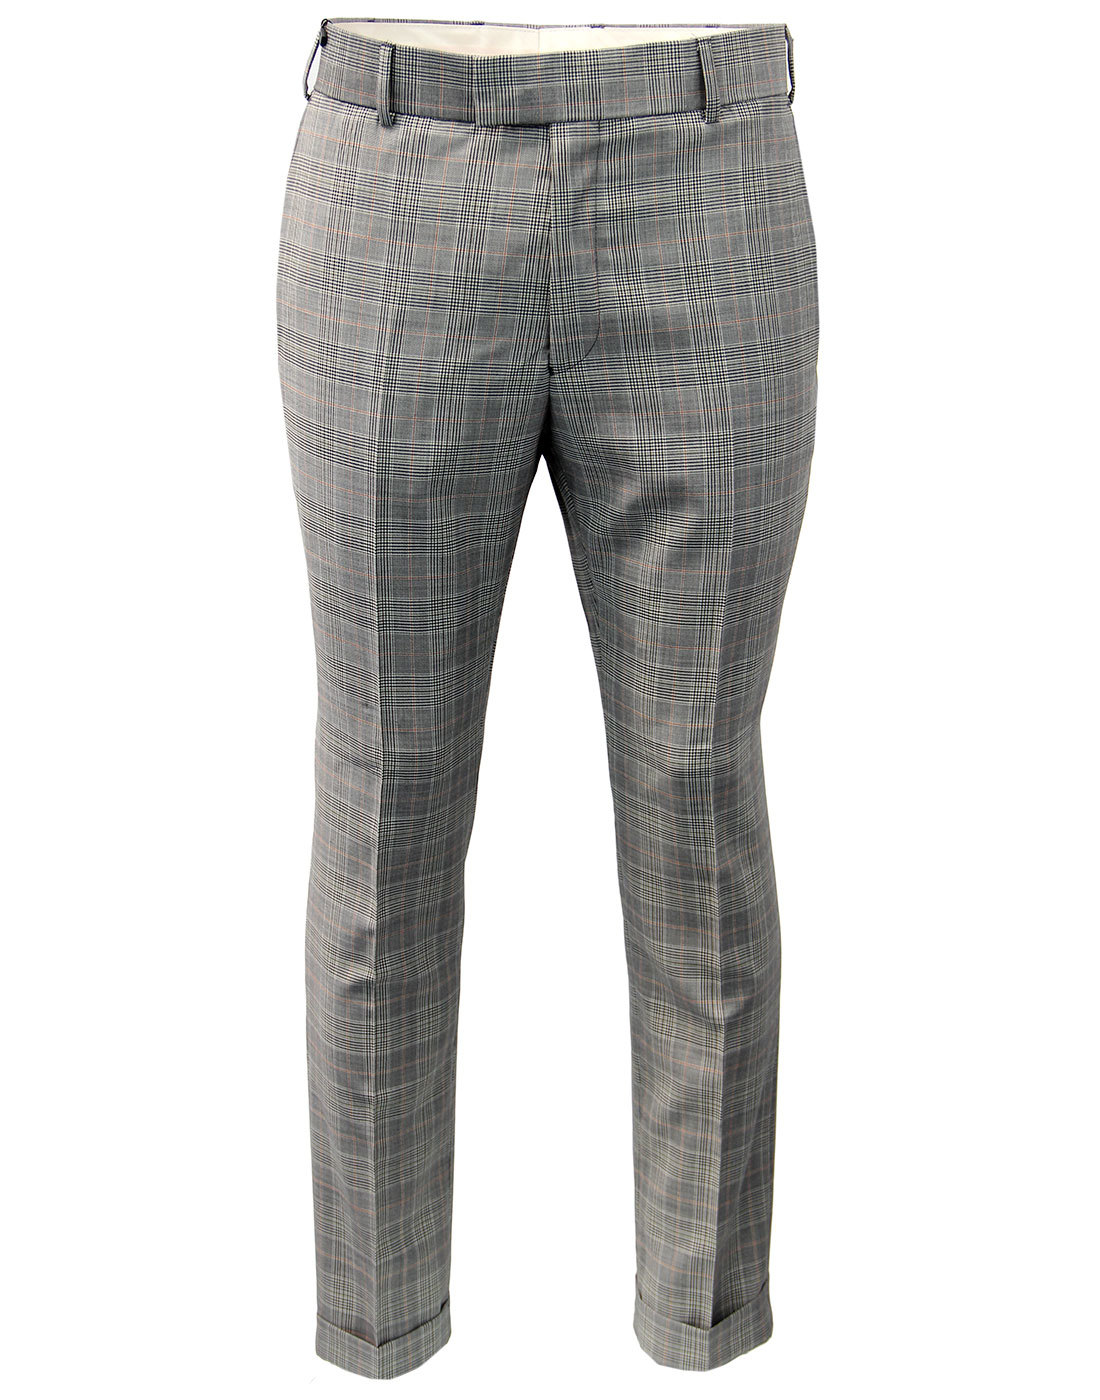 GIBSON LONDON 1960s Mod Dogtooth Prince Of Wales Check Trousers